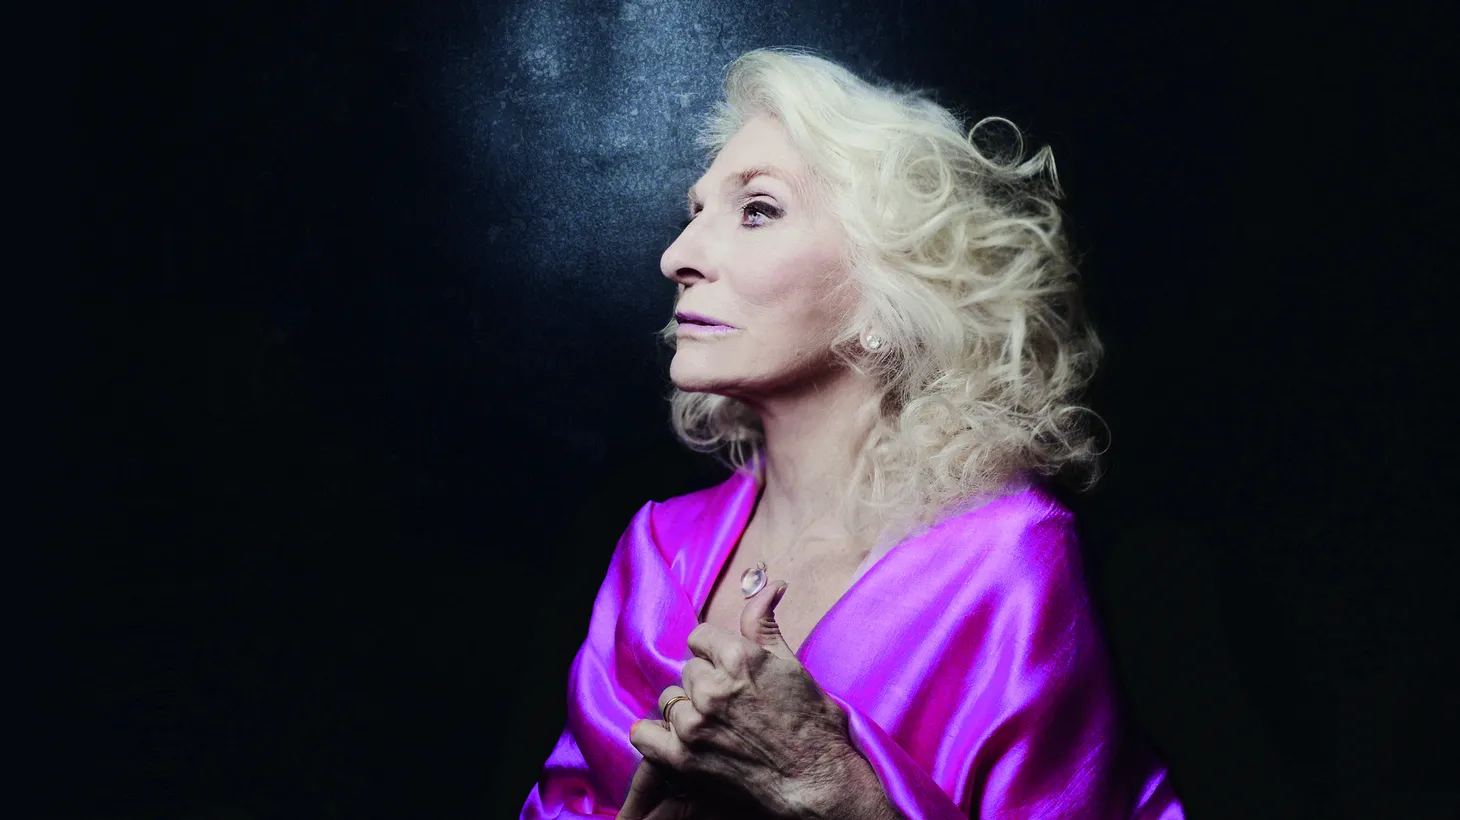 Singer-songwriter Judy Collins released her first album of all original songs at 82 years old.